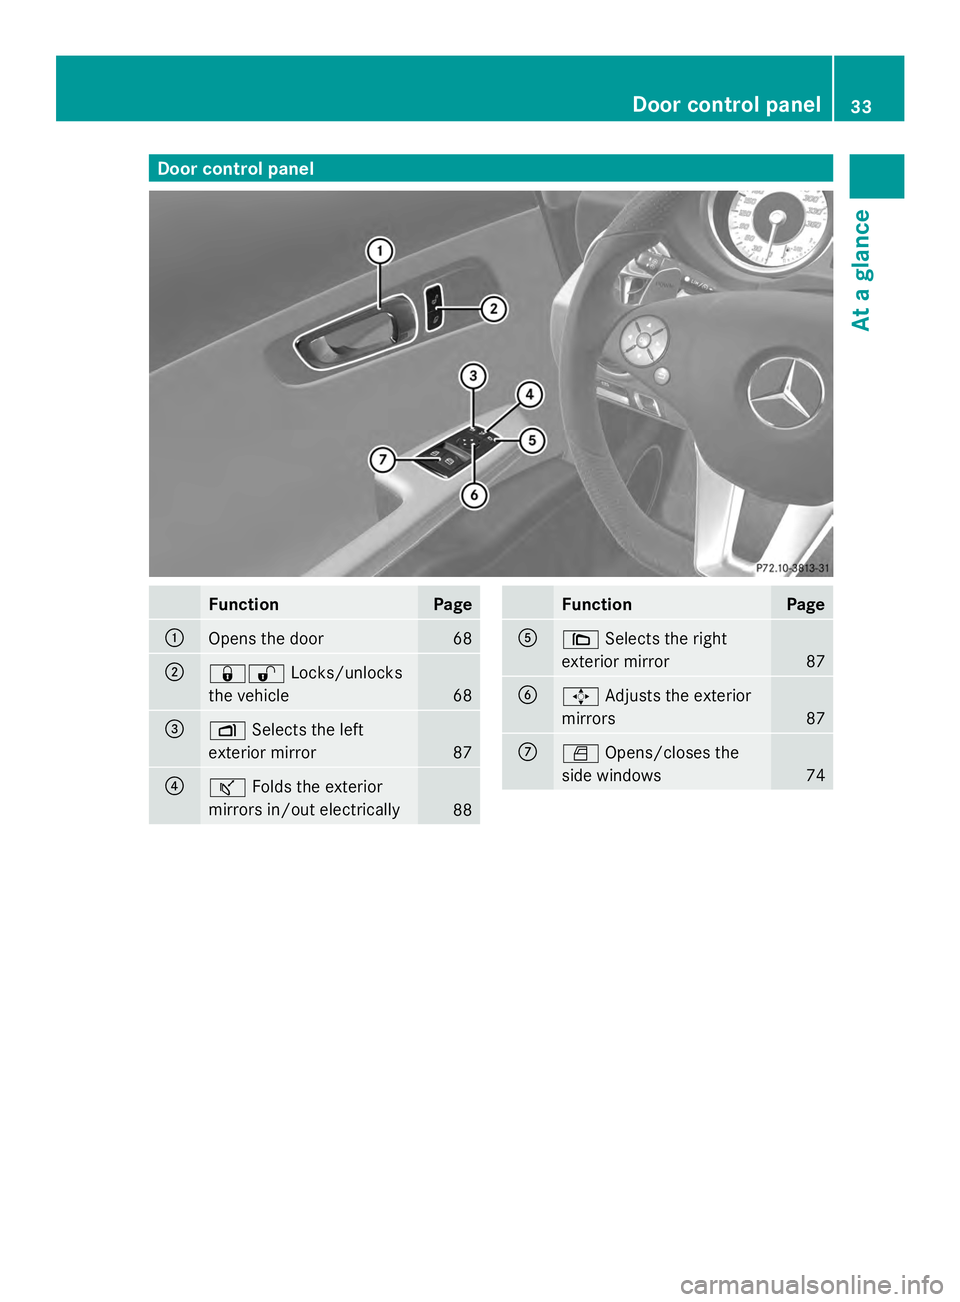 MERCEDES-BENZ SLS AMG 2013 User Guide Door control panel
Function Page
0043
Opens the door 68
0044
00370036
Locks/unlocks
the vehicle 68
0087
0070
Selects the left
exterior mirror 87
0085
00AD
Folds the exterior
mirrors in/out electricall